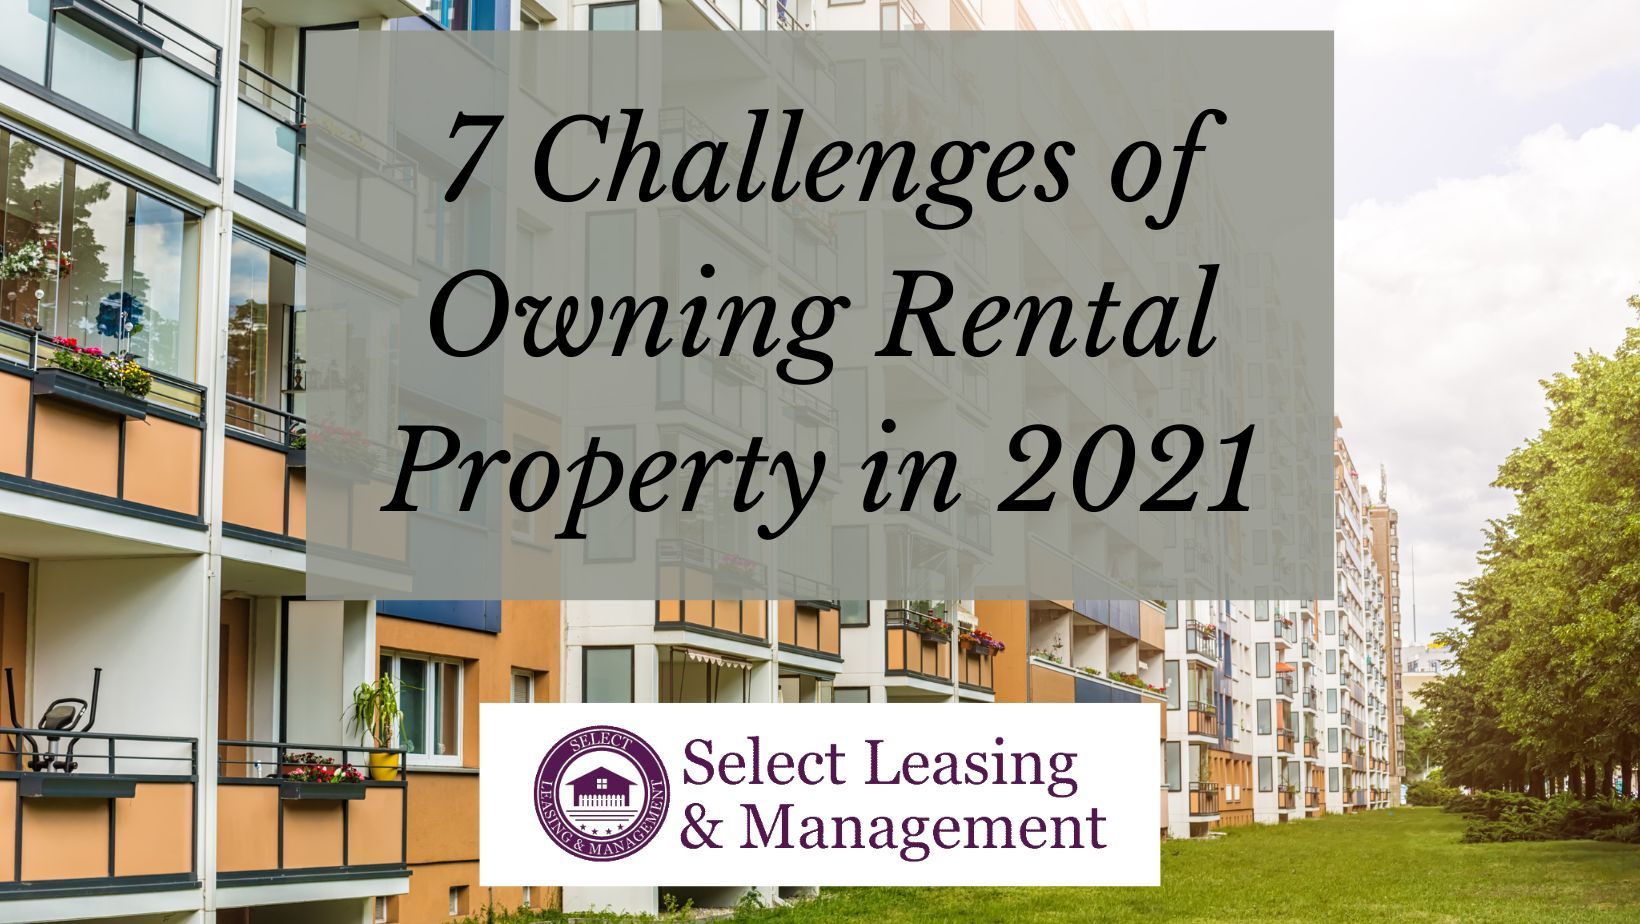 7 challenges of owning rental property in 2021